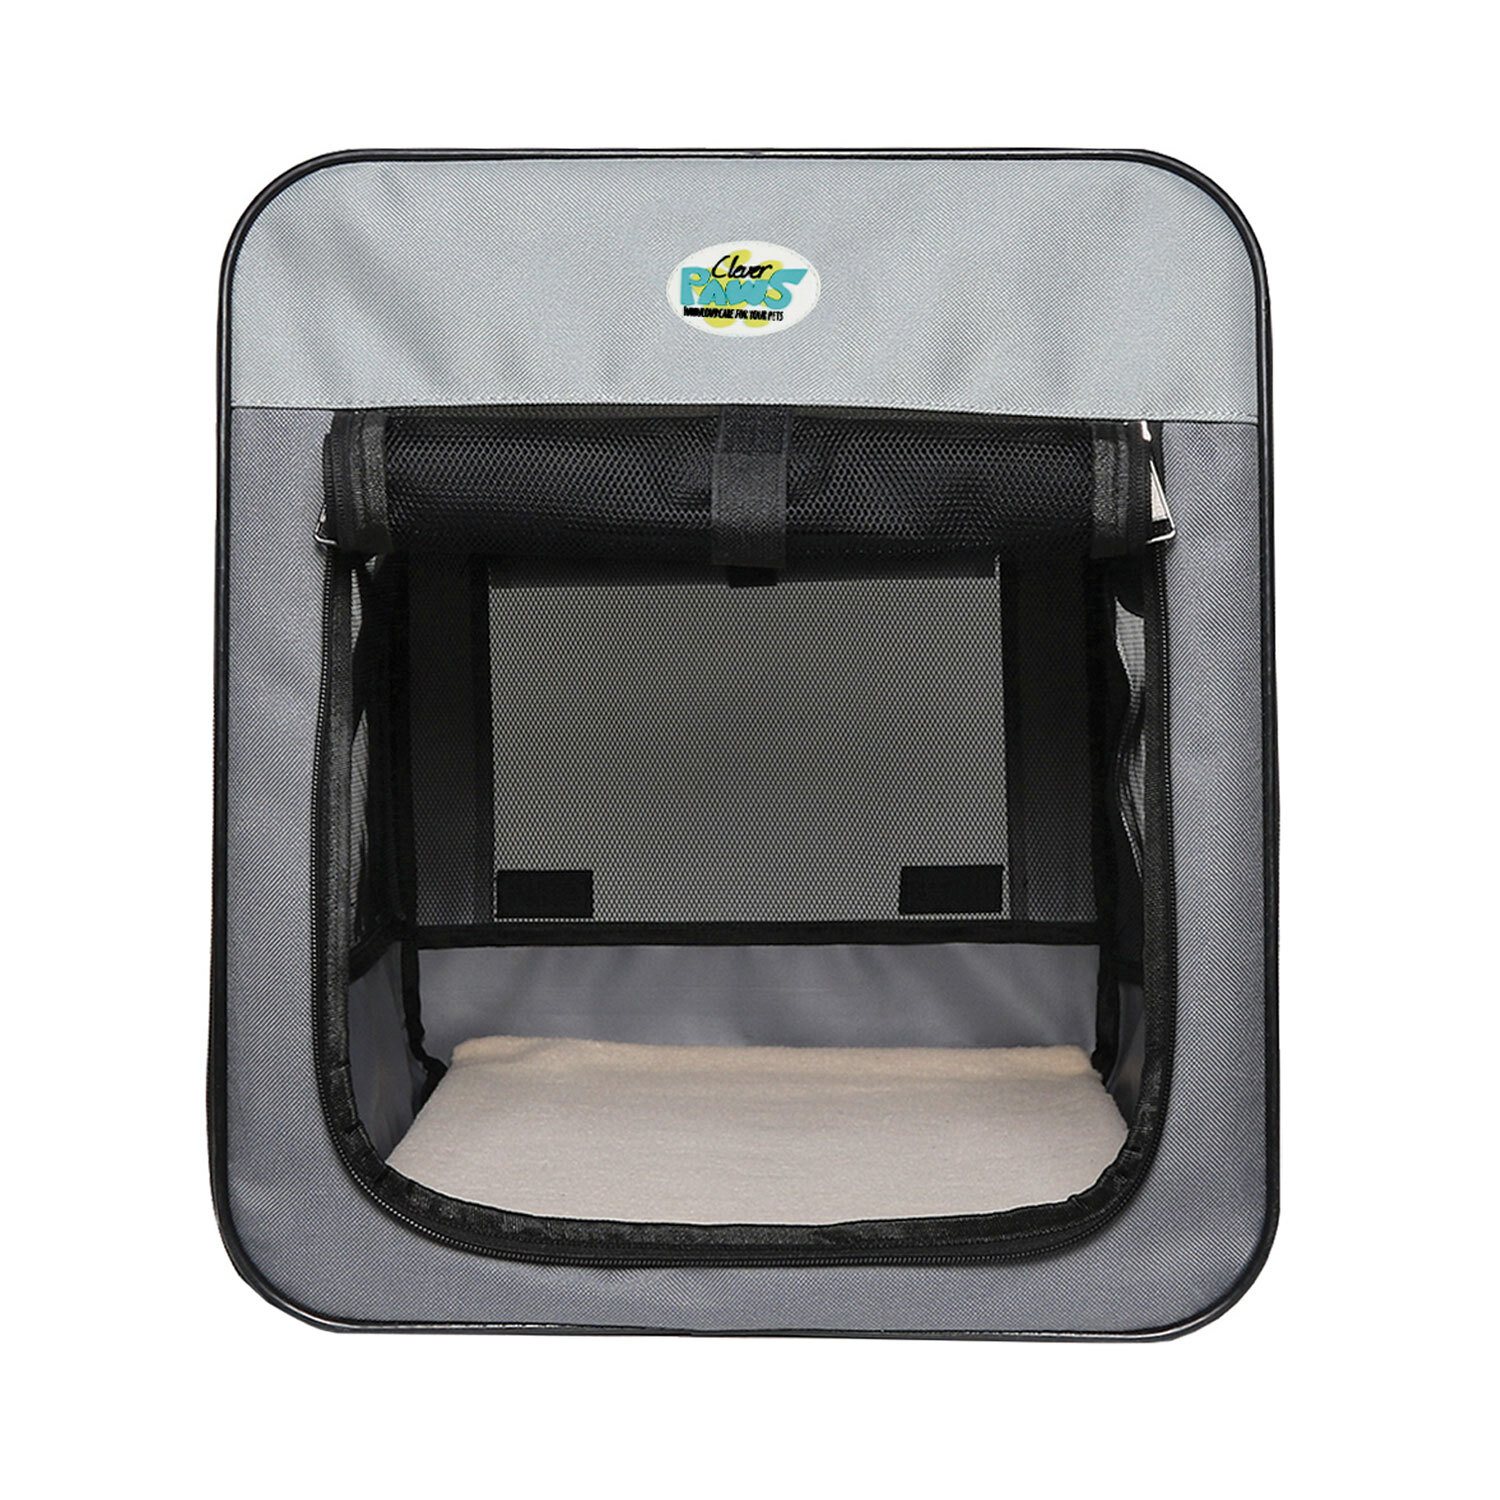 Clever Paws Jumbo Soft Pet Kennel Image 6